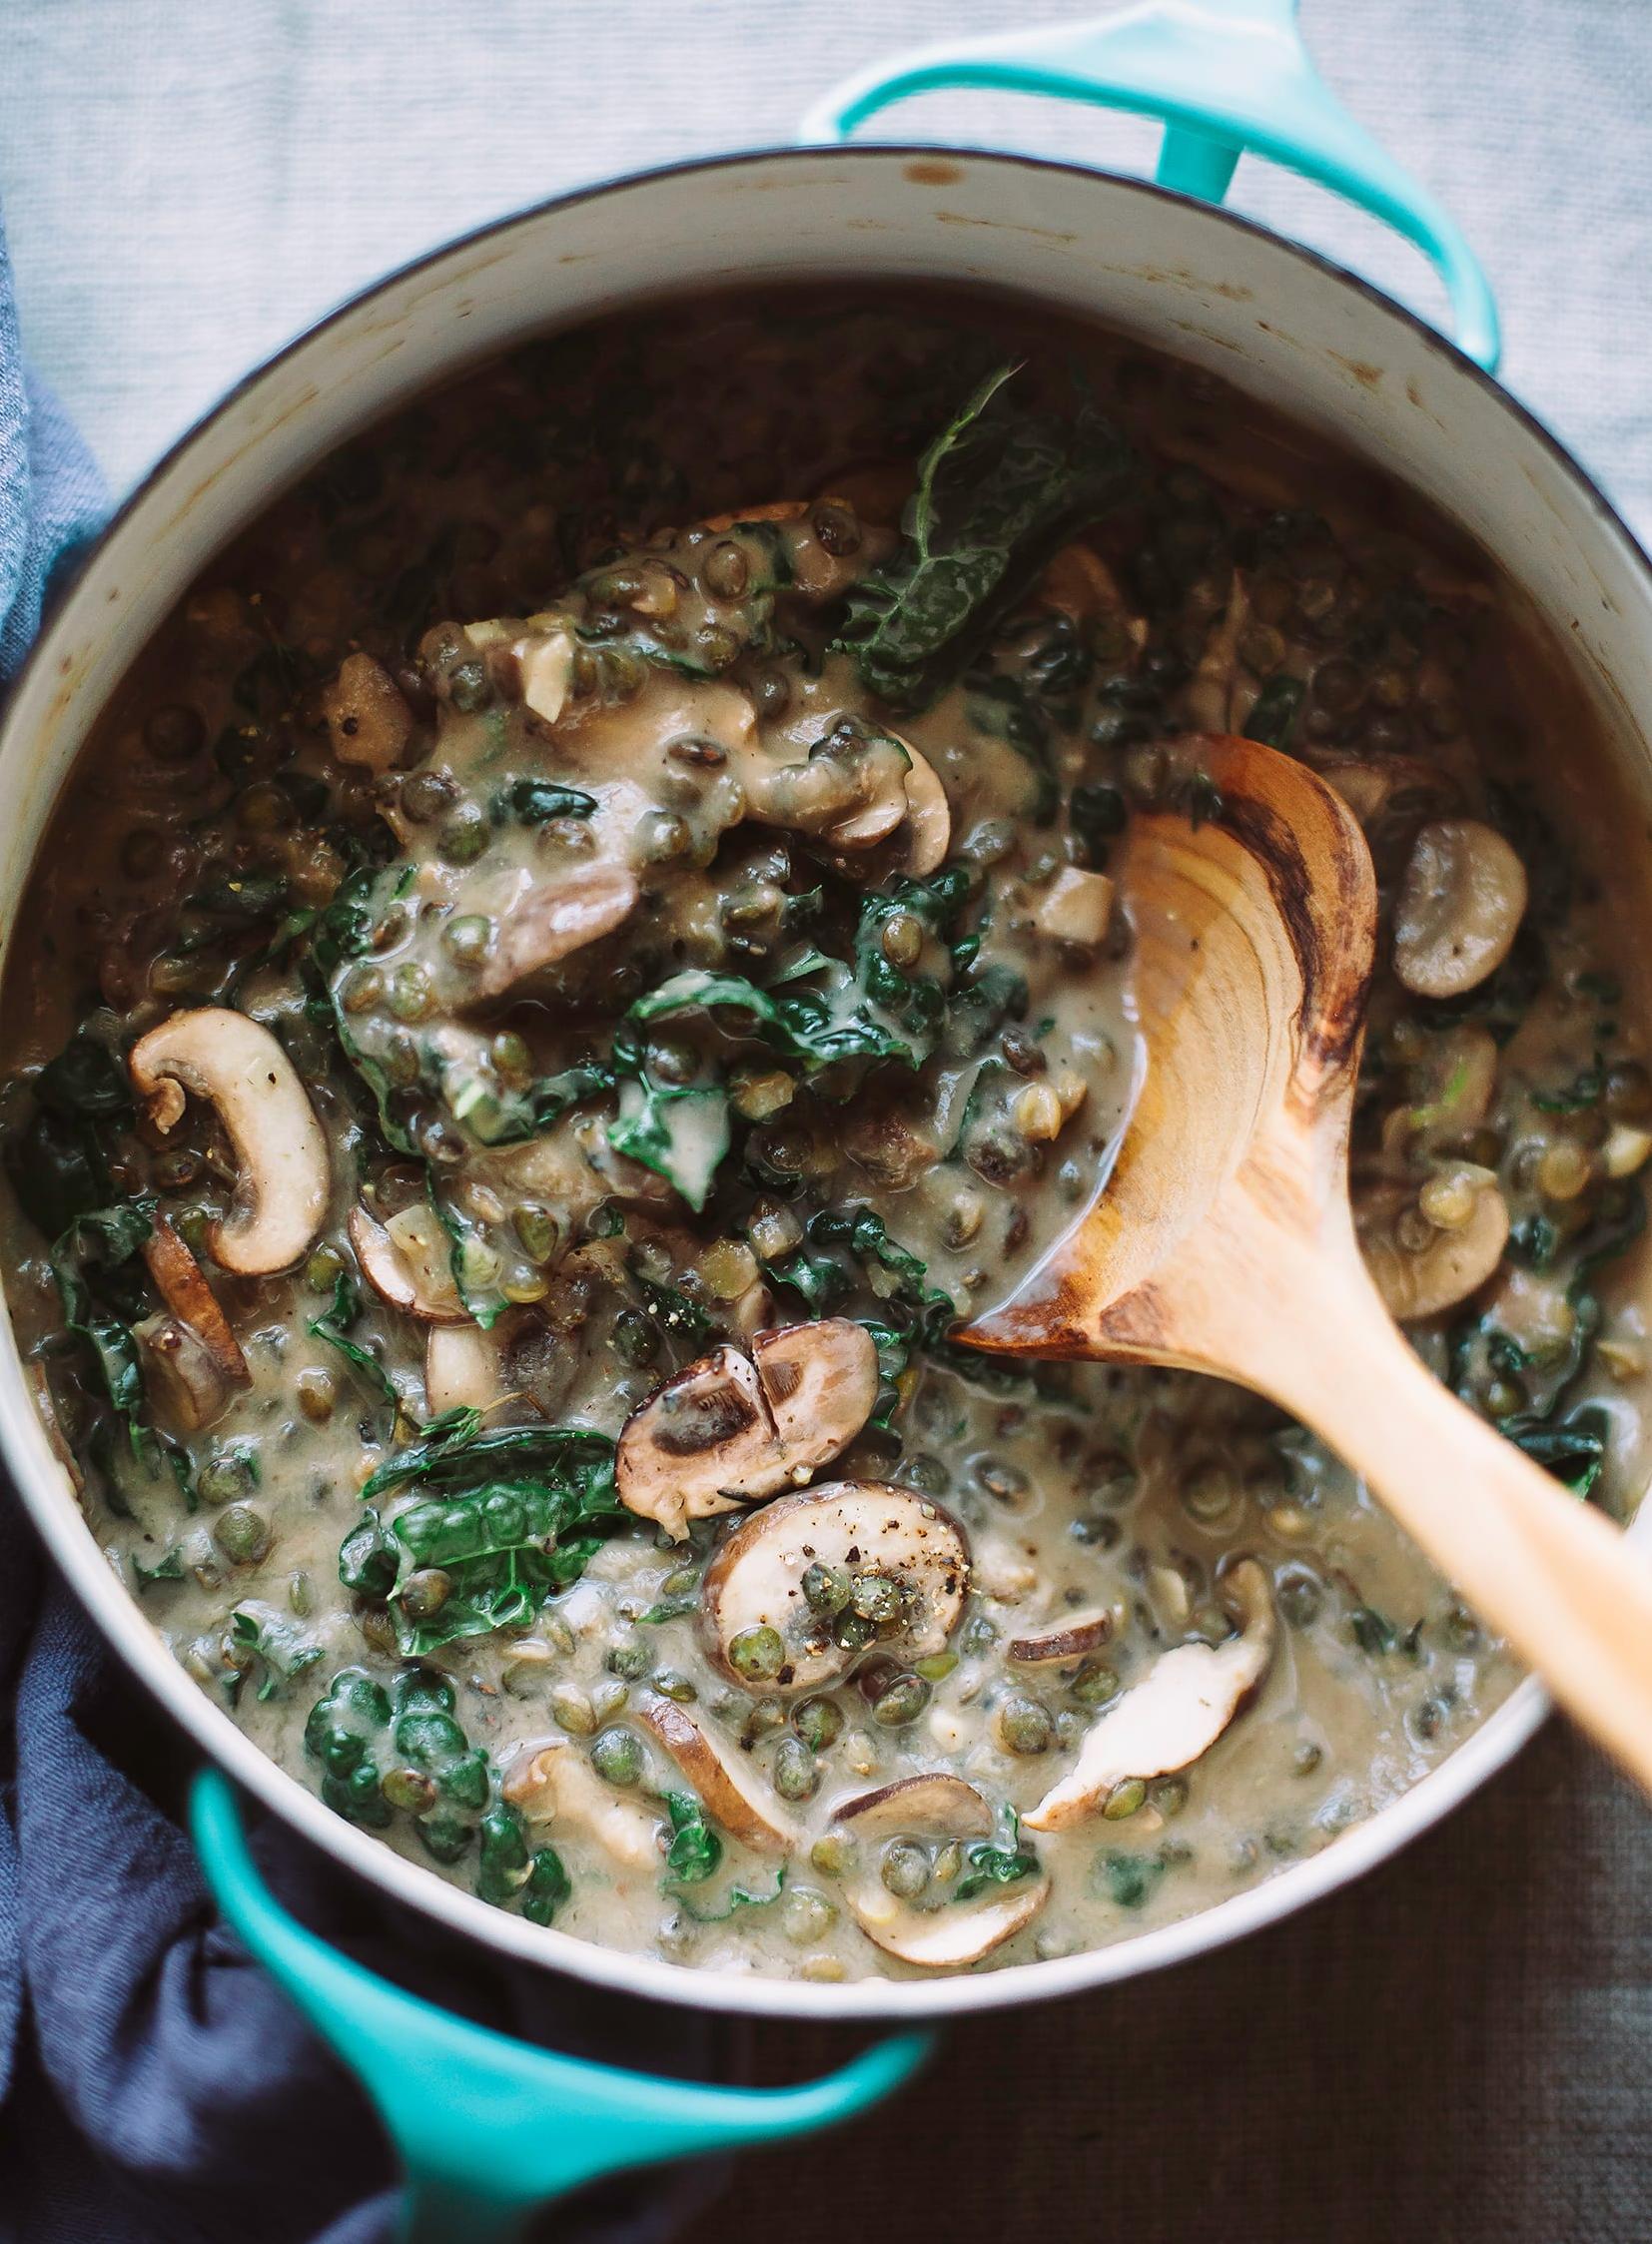  Satisfy your appetite with a rich and creamy bowl of lentil-mushroom soup.